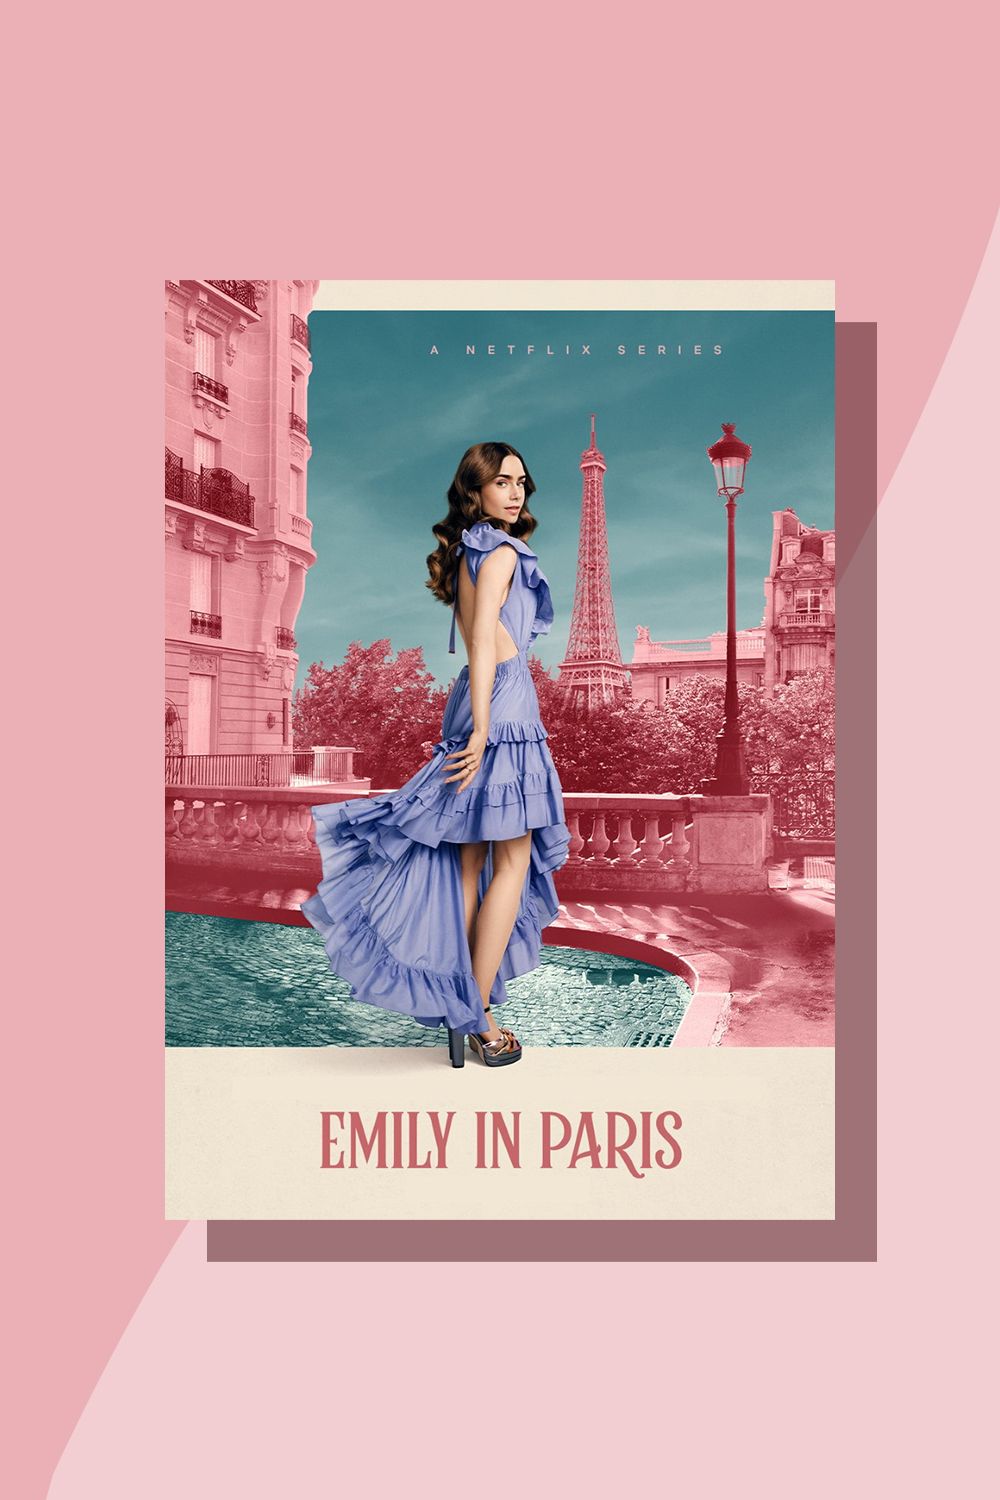 Emily Is Still in Paris. Why Are We Still Watching? - The New York